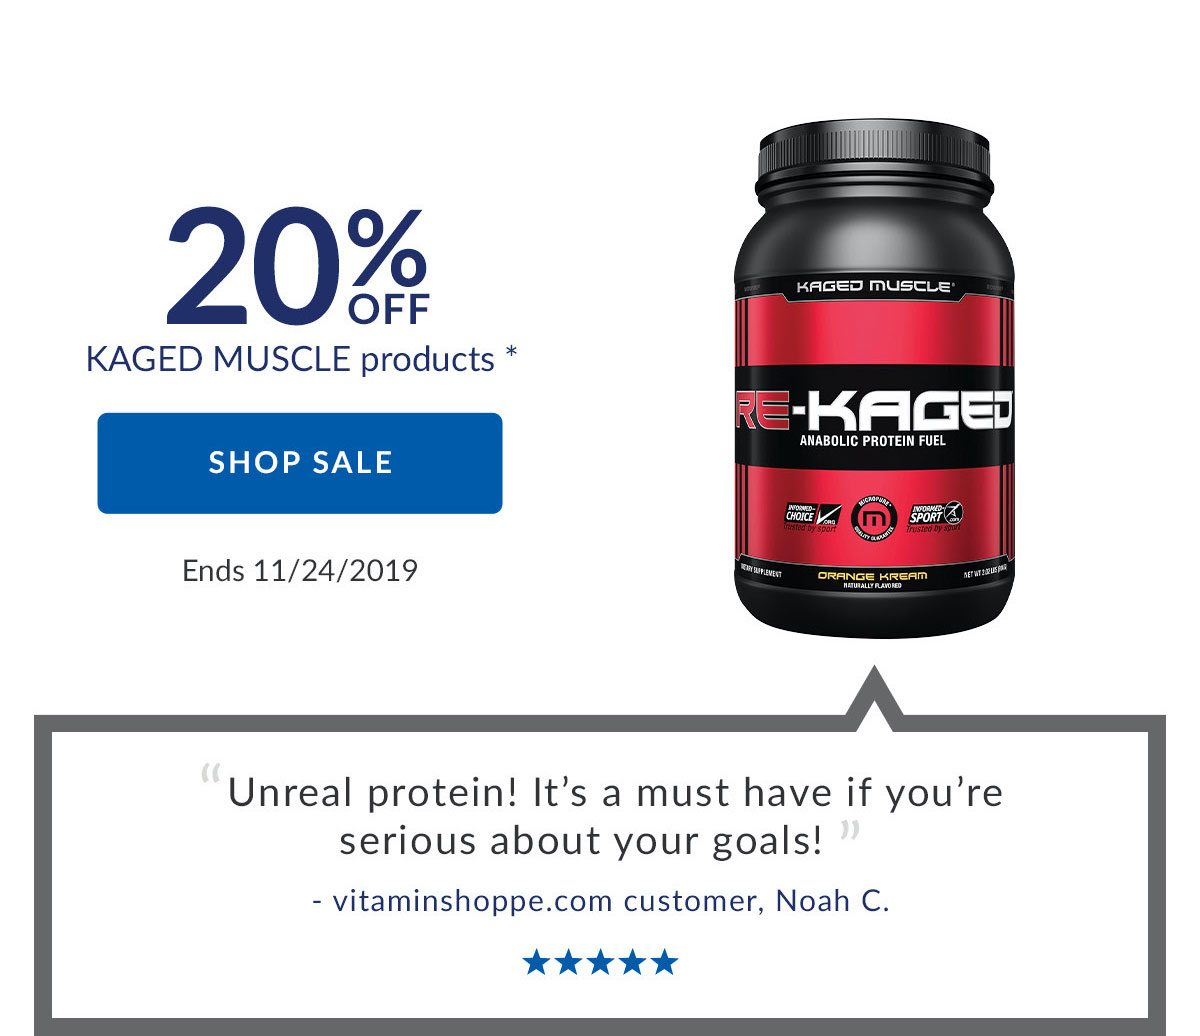 20% OFF KAGED MUSCLE products * | SHOP SALE | Ends 11/24/2019